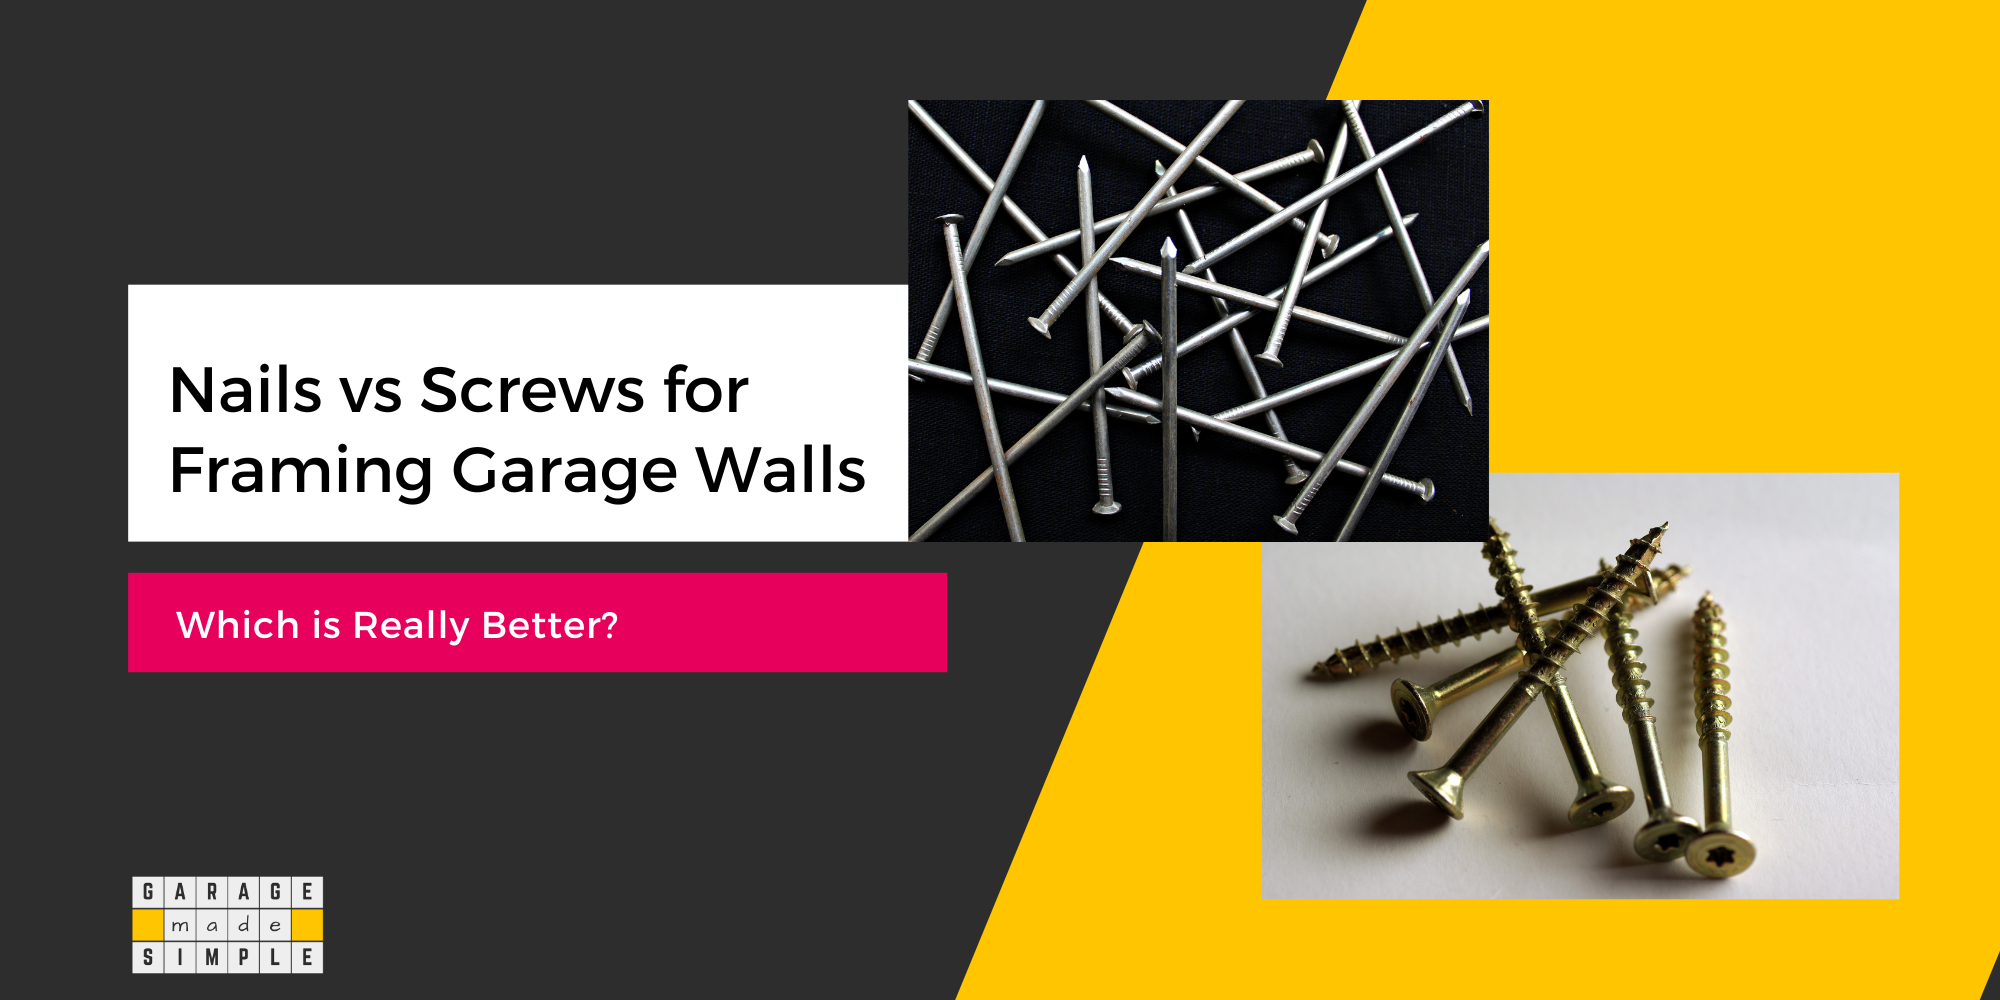 Nails vs Screws for Framing Garage Walls: Which is a Better Choice?